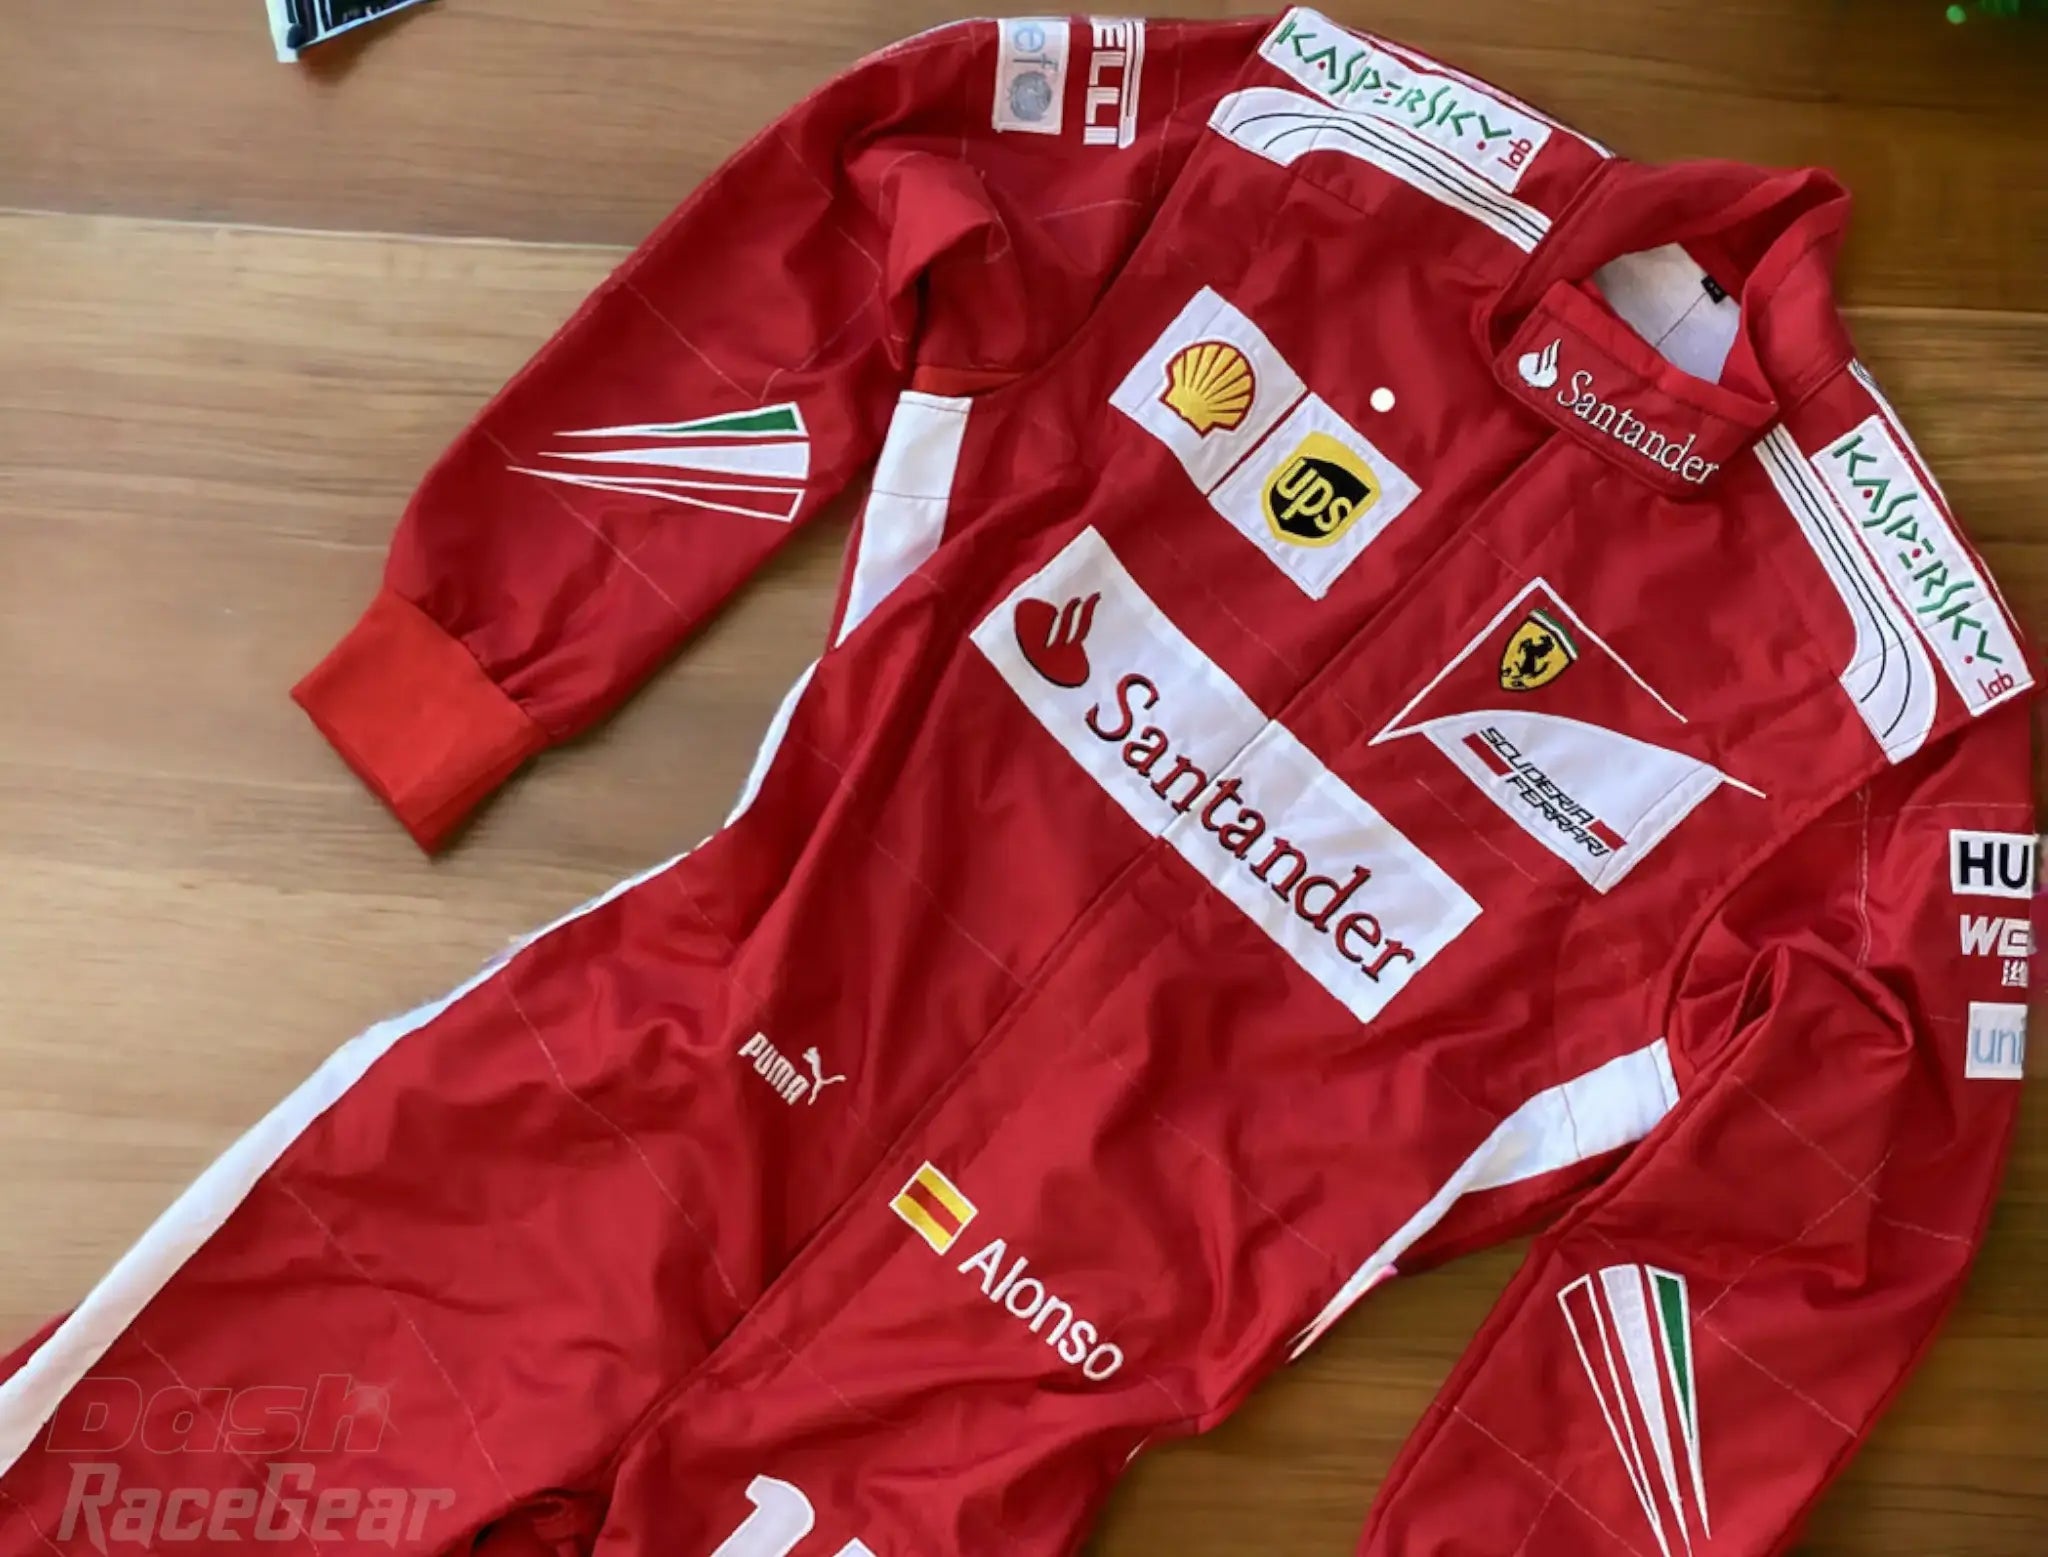 2014 Fernando Alonso Ferrari F1 Embroidered Racing Suit